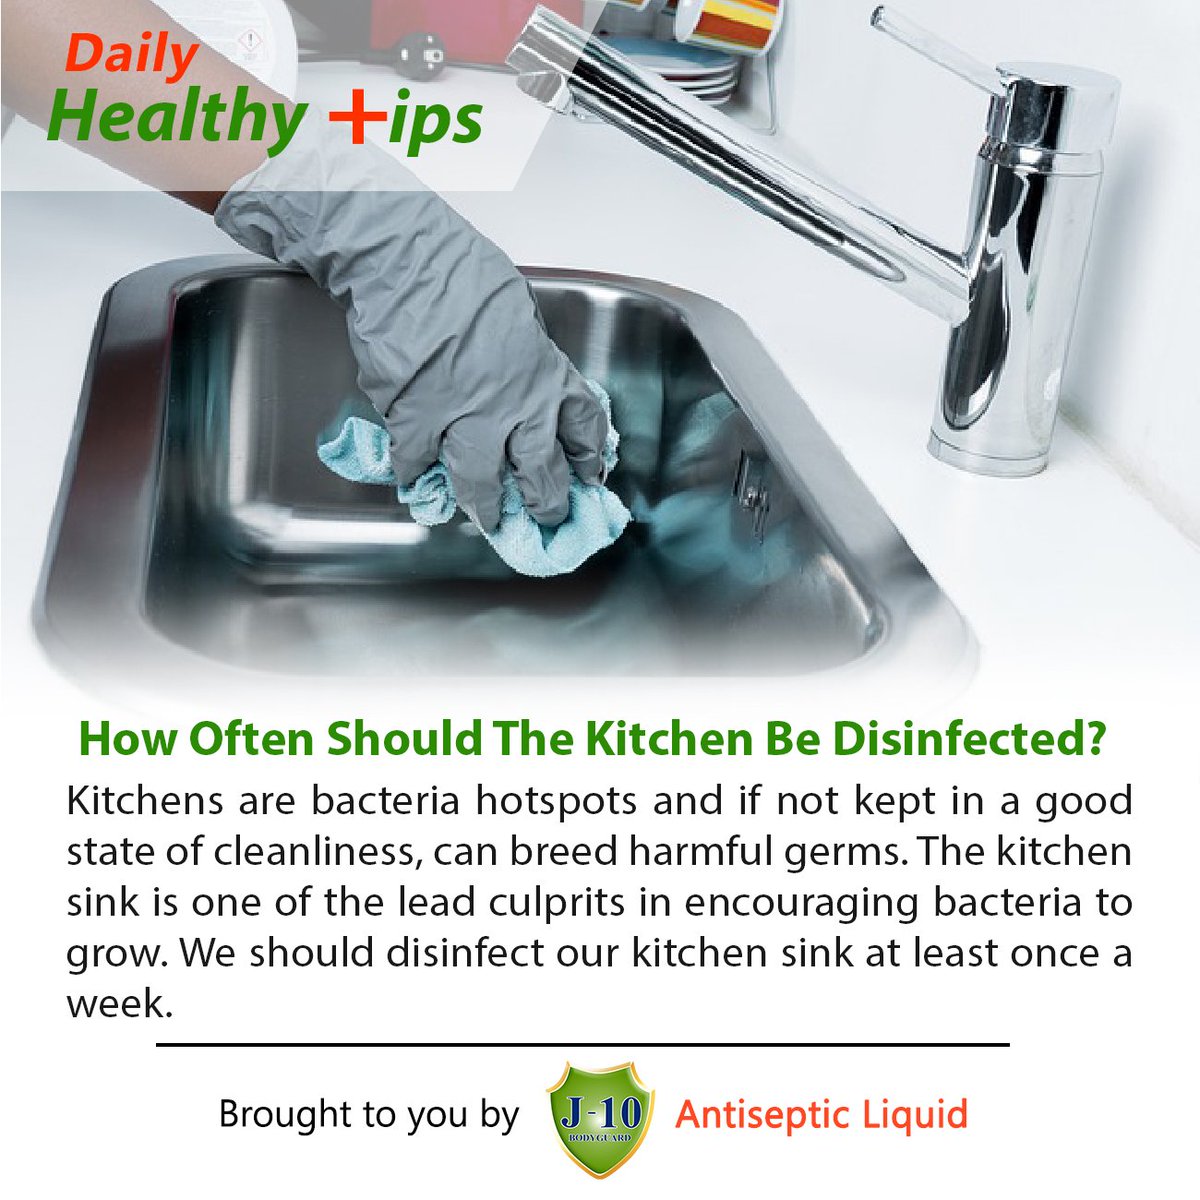 J10 Antiseptic On Twitter Make Your Kitchen Sink Germ Free